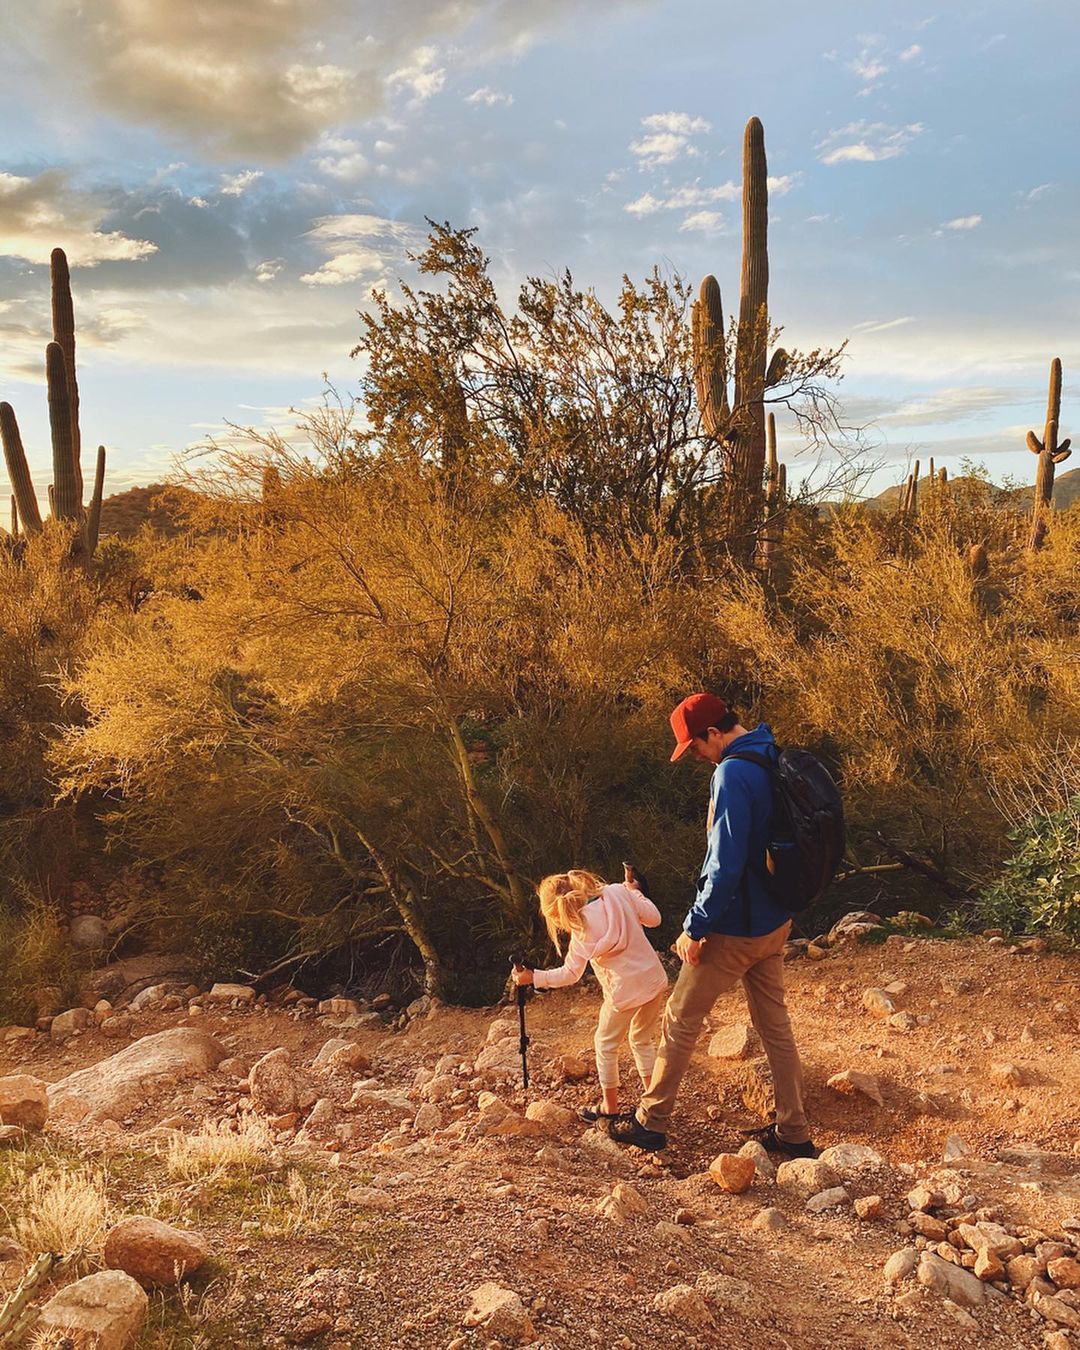 Man and Child Hiking in Usery Pass Mountain. Photo by Instagram user @anywherethatiswild